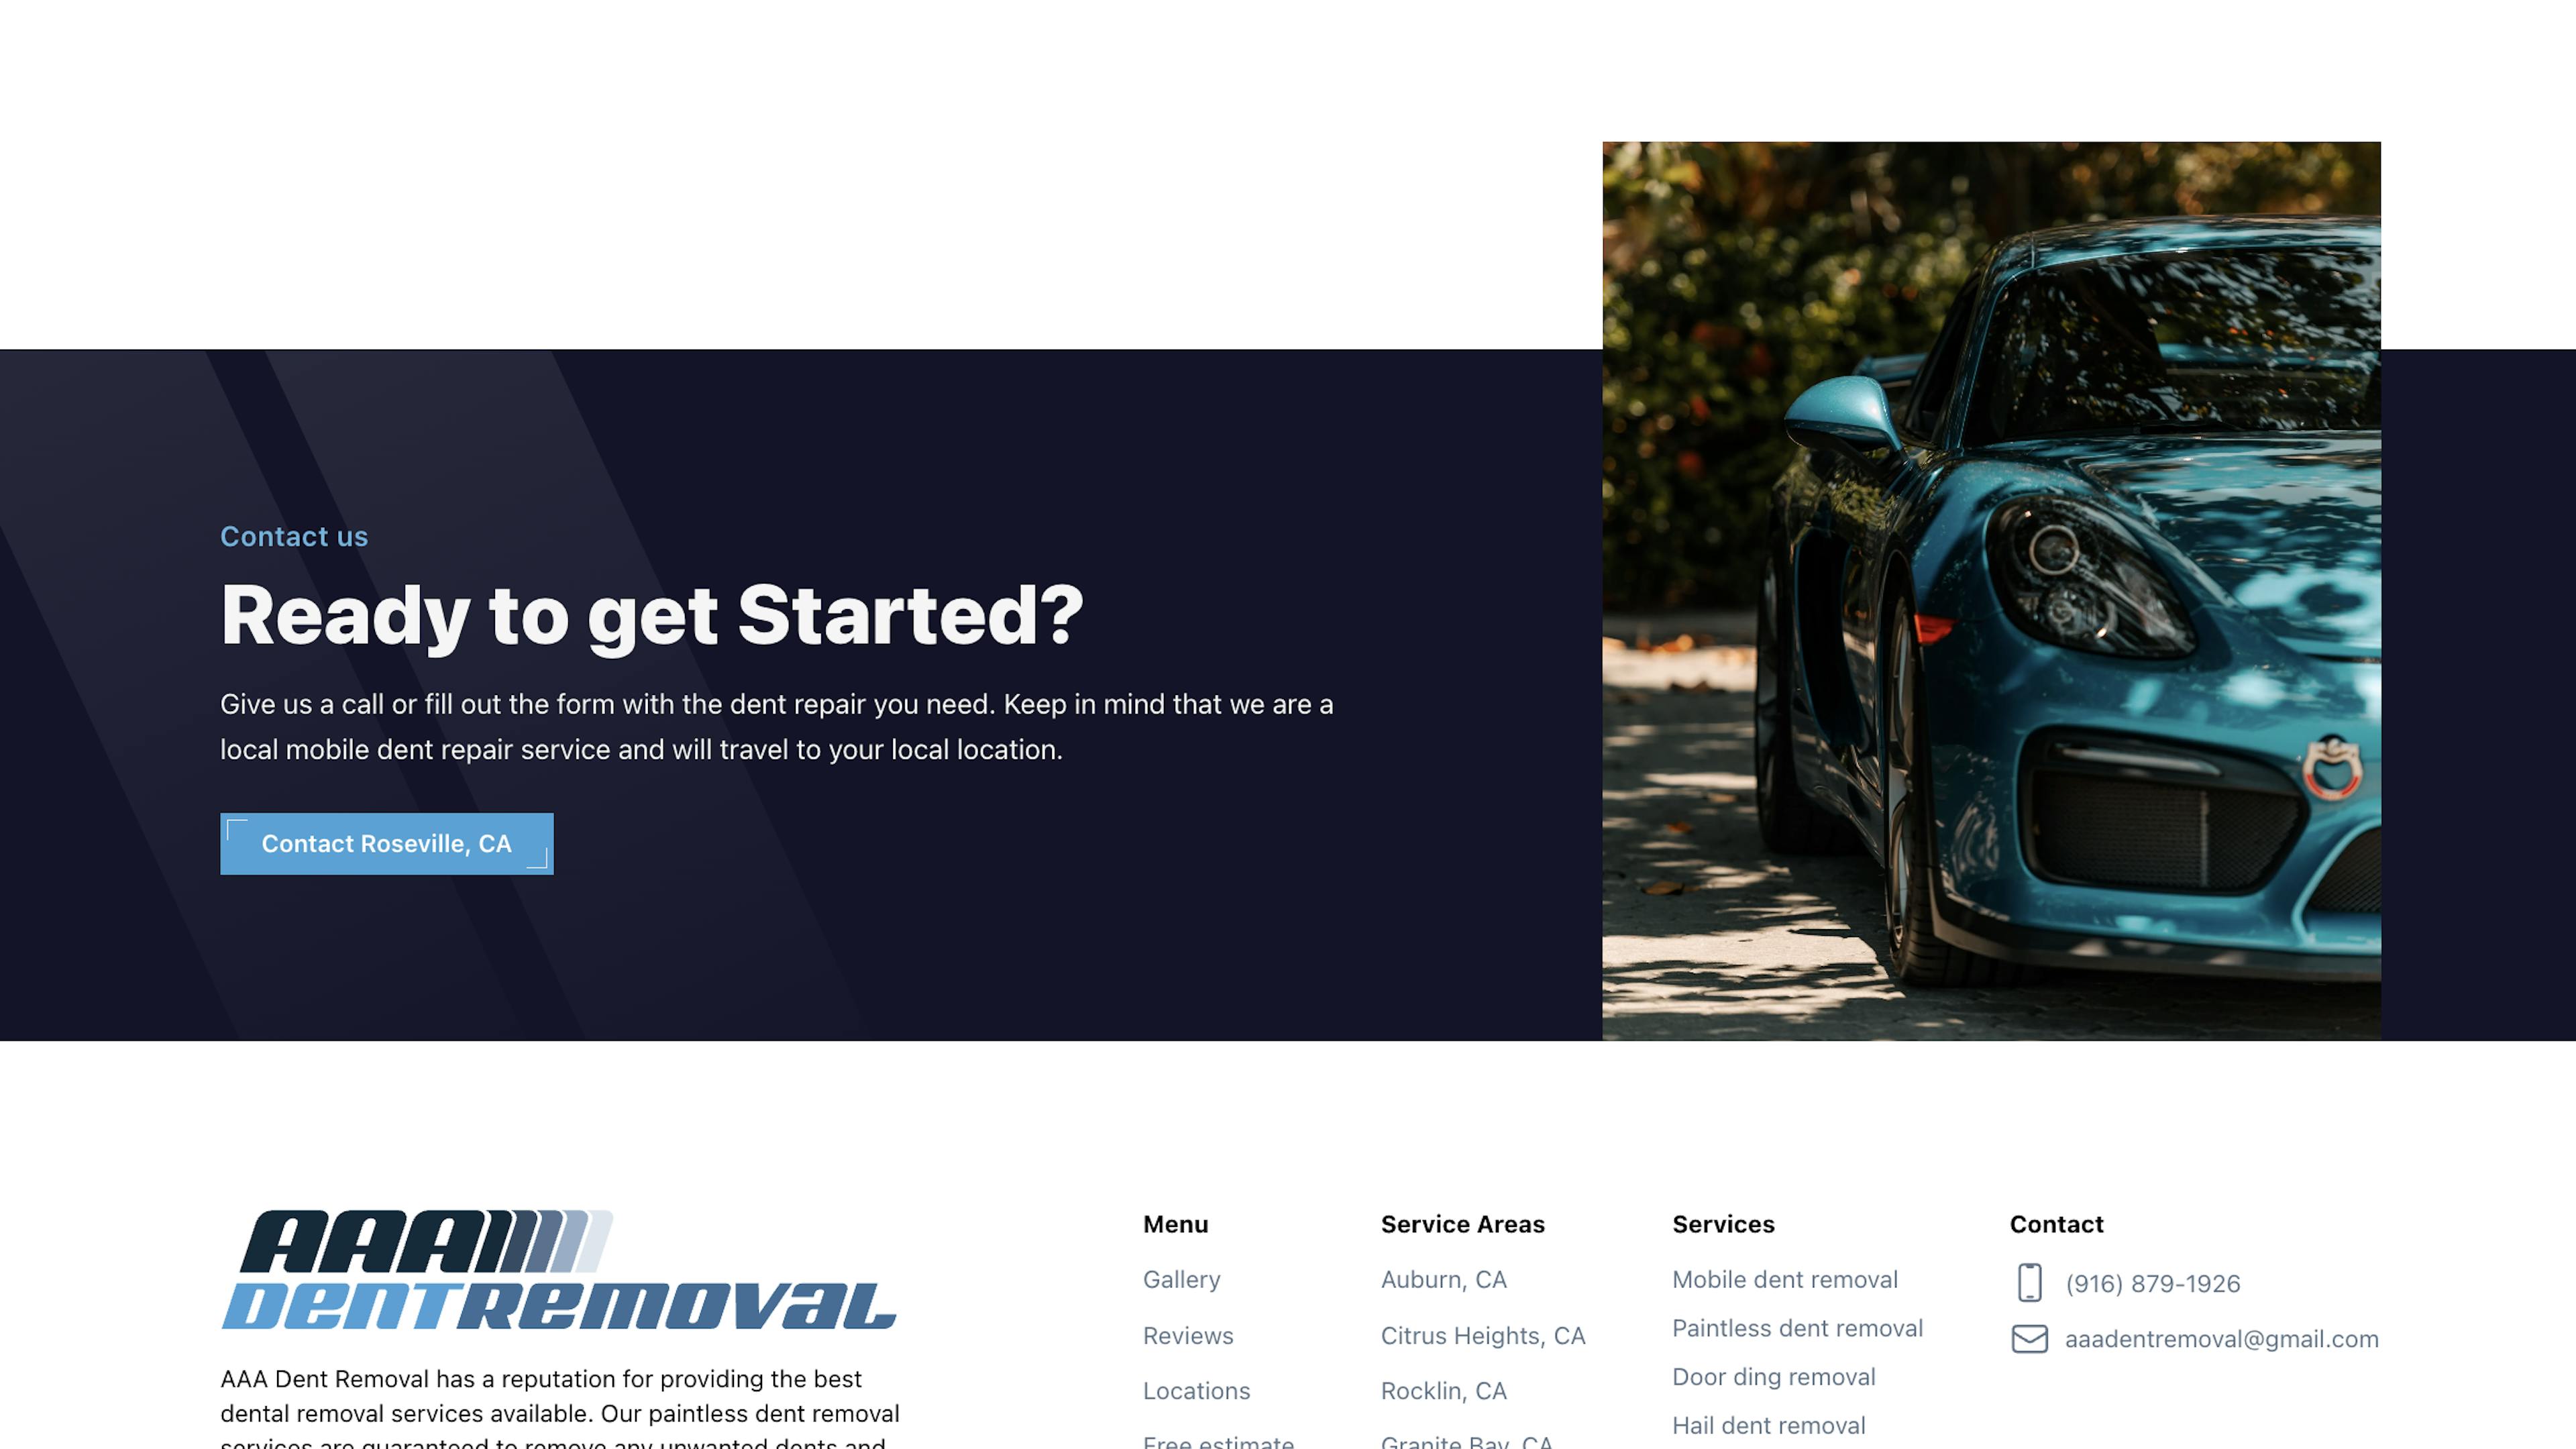 Webpage section from AAA Dent Removal with a bold headline 'Ready to get Started?', inviting visitors to contact for mobile dent repair services. A contact button is labeled 'Contact Roseville, CA'. The page is complemented by a vivid image of a blue sports car, symbolizing the type of vehicles they service. Footer lists service areas, services offered like mobile and hail dent removal, and contact information, highlighting their accessibility and local presence.